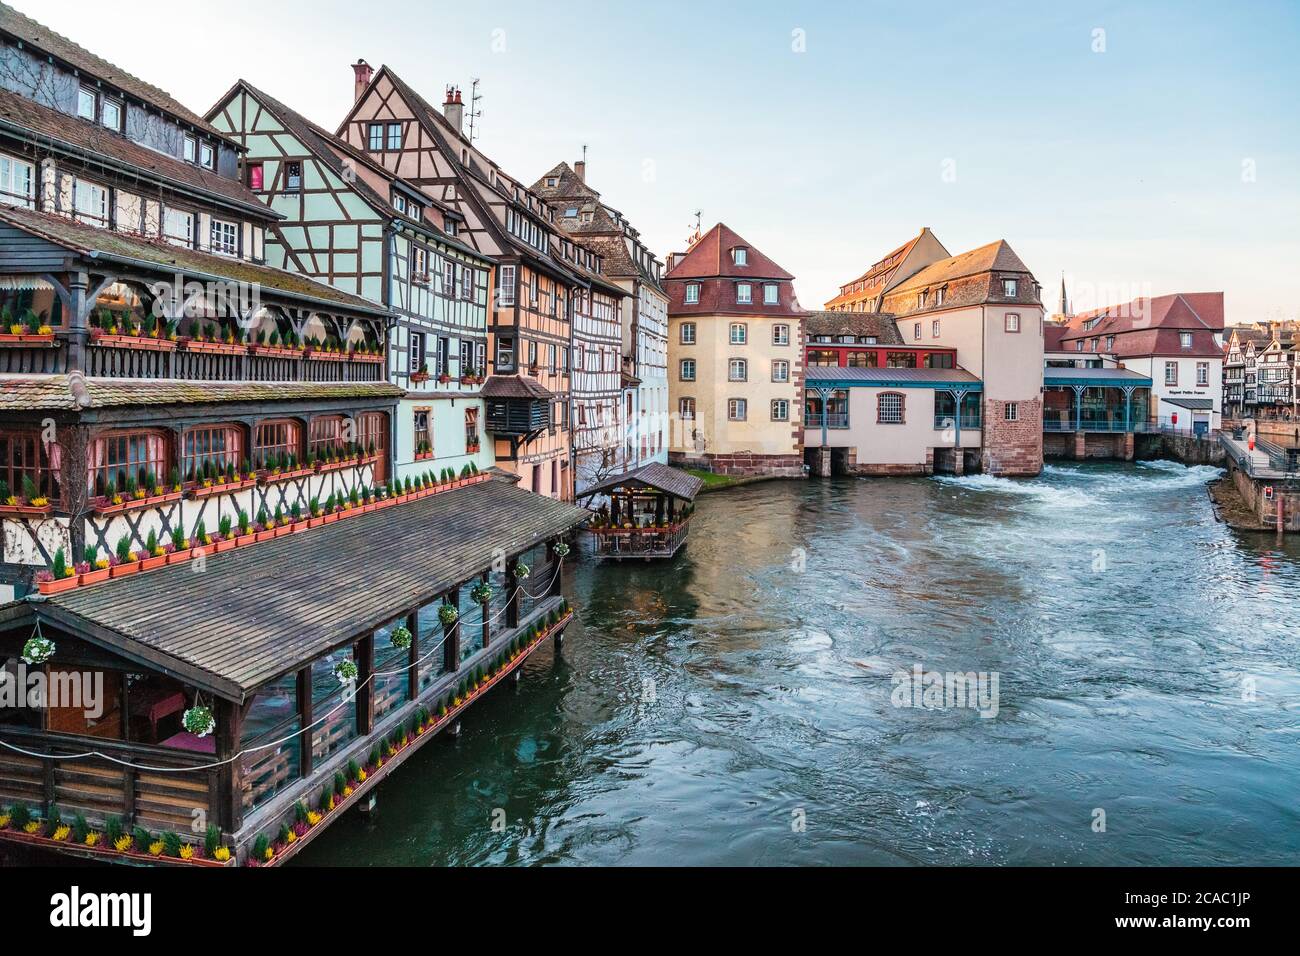 The Petite France - a historic quarter of the city of Strasbourg, Alsace, France Stock Photo